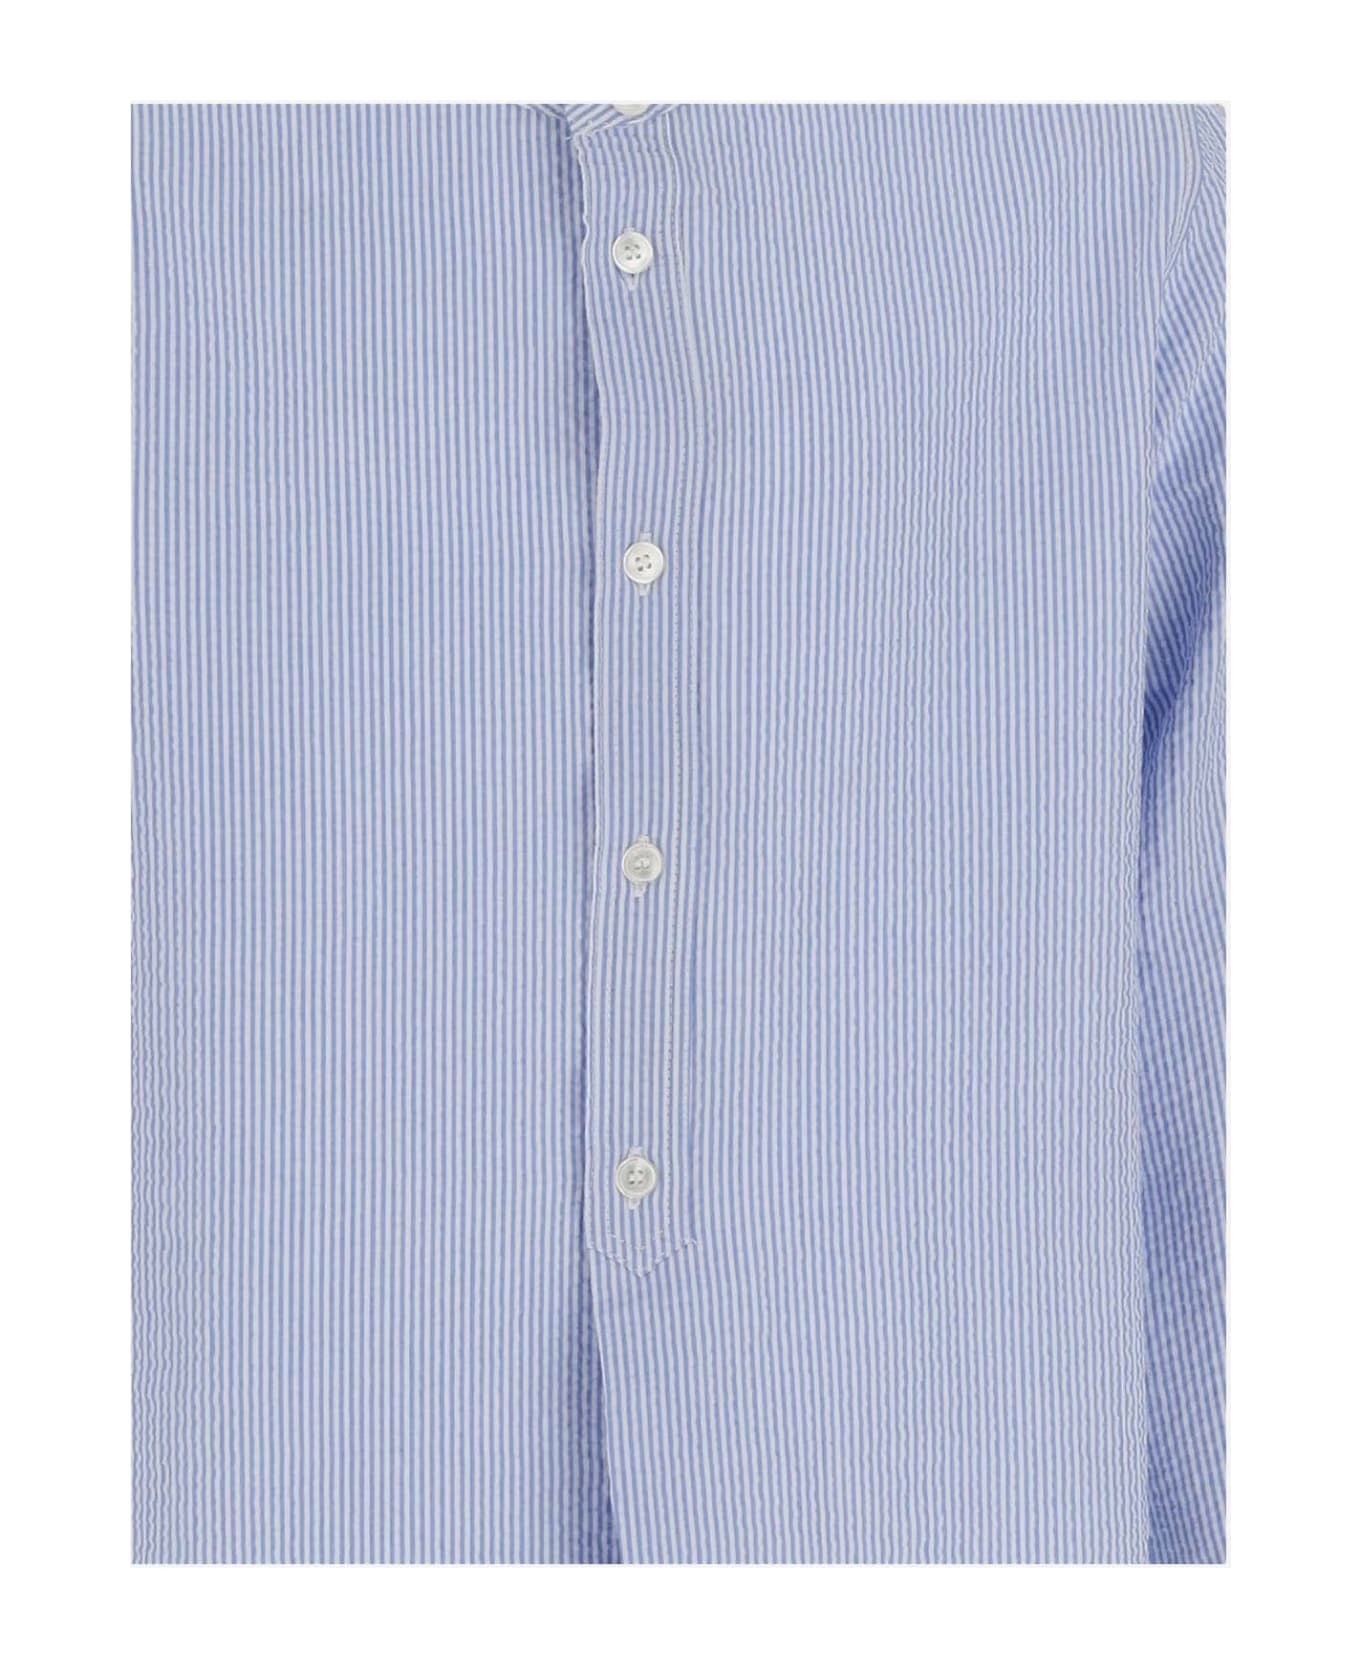 Il Gufo Stretch Cotton Shirt With Striped Pattern - Clear Blue